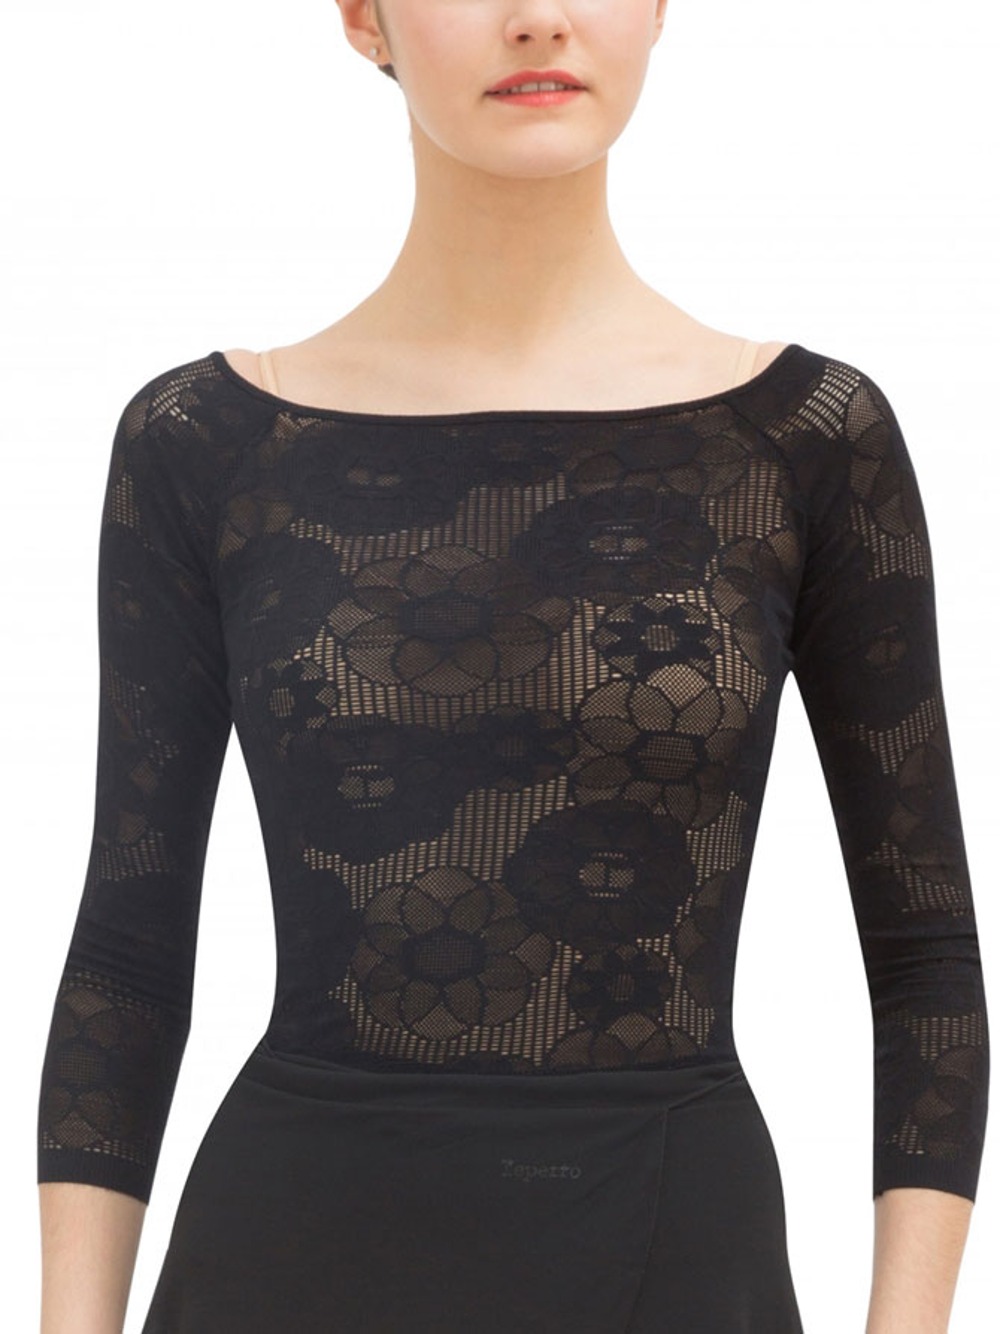 LONG SLEEVES TOP IN LACE - BLACK